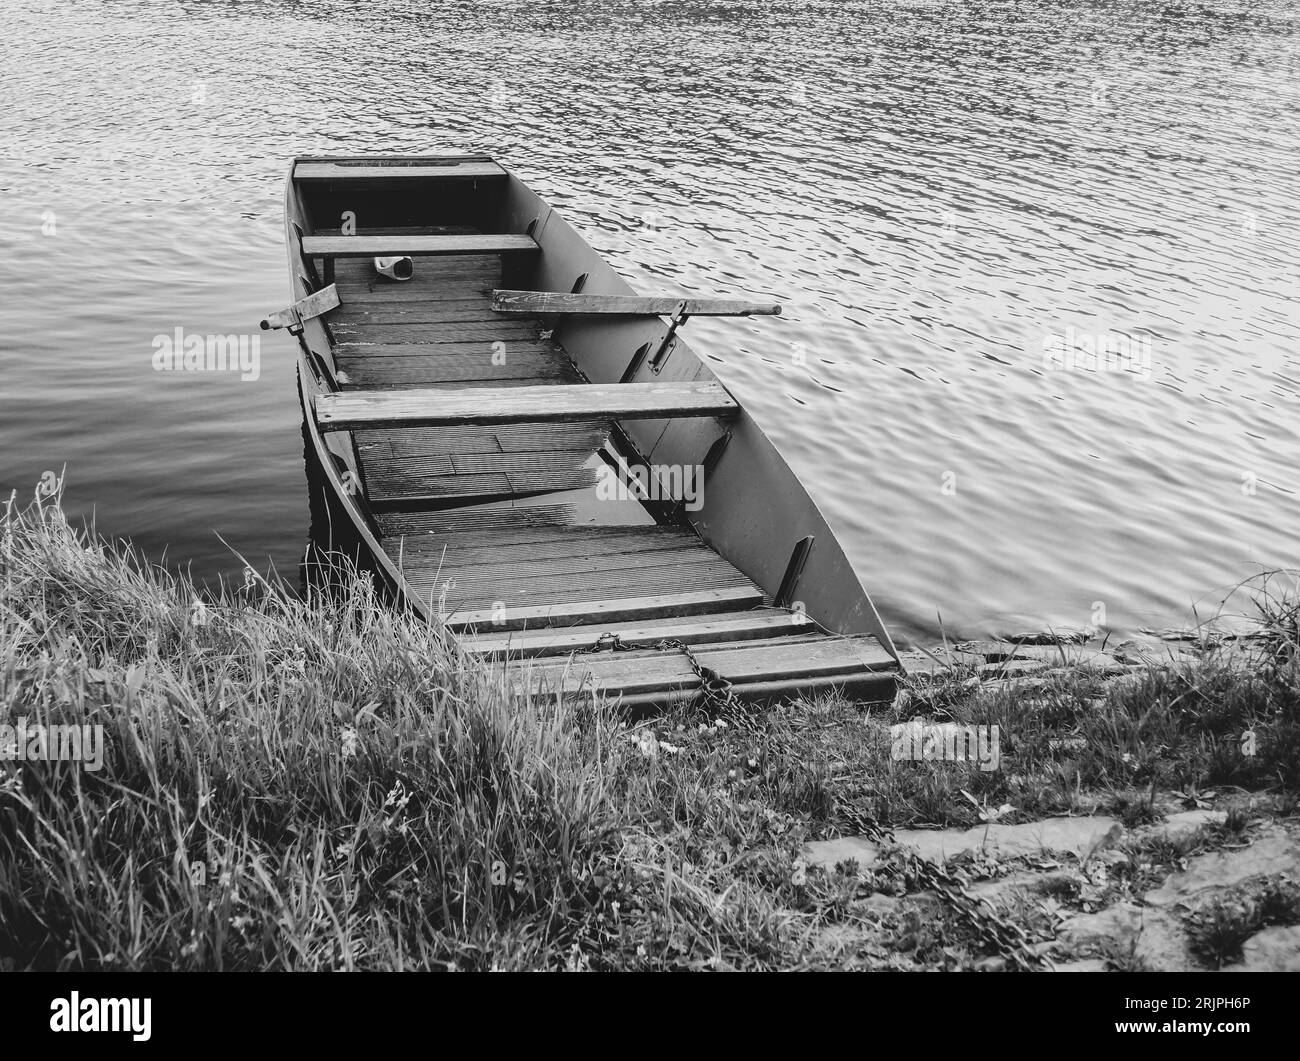 Moored boat by the shore, Black and White Stock Photo